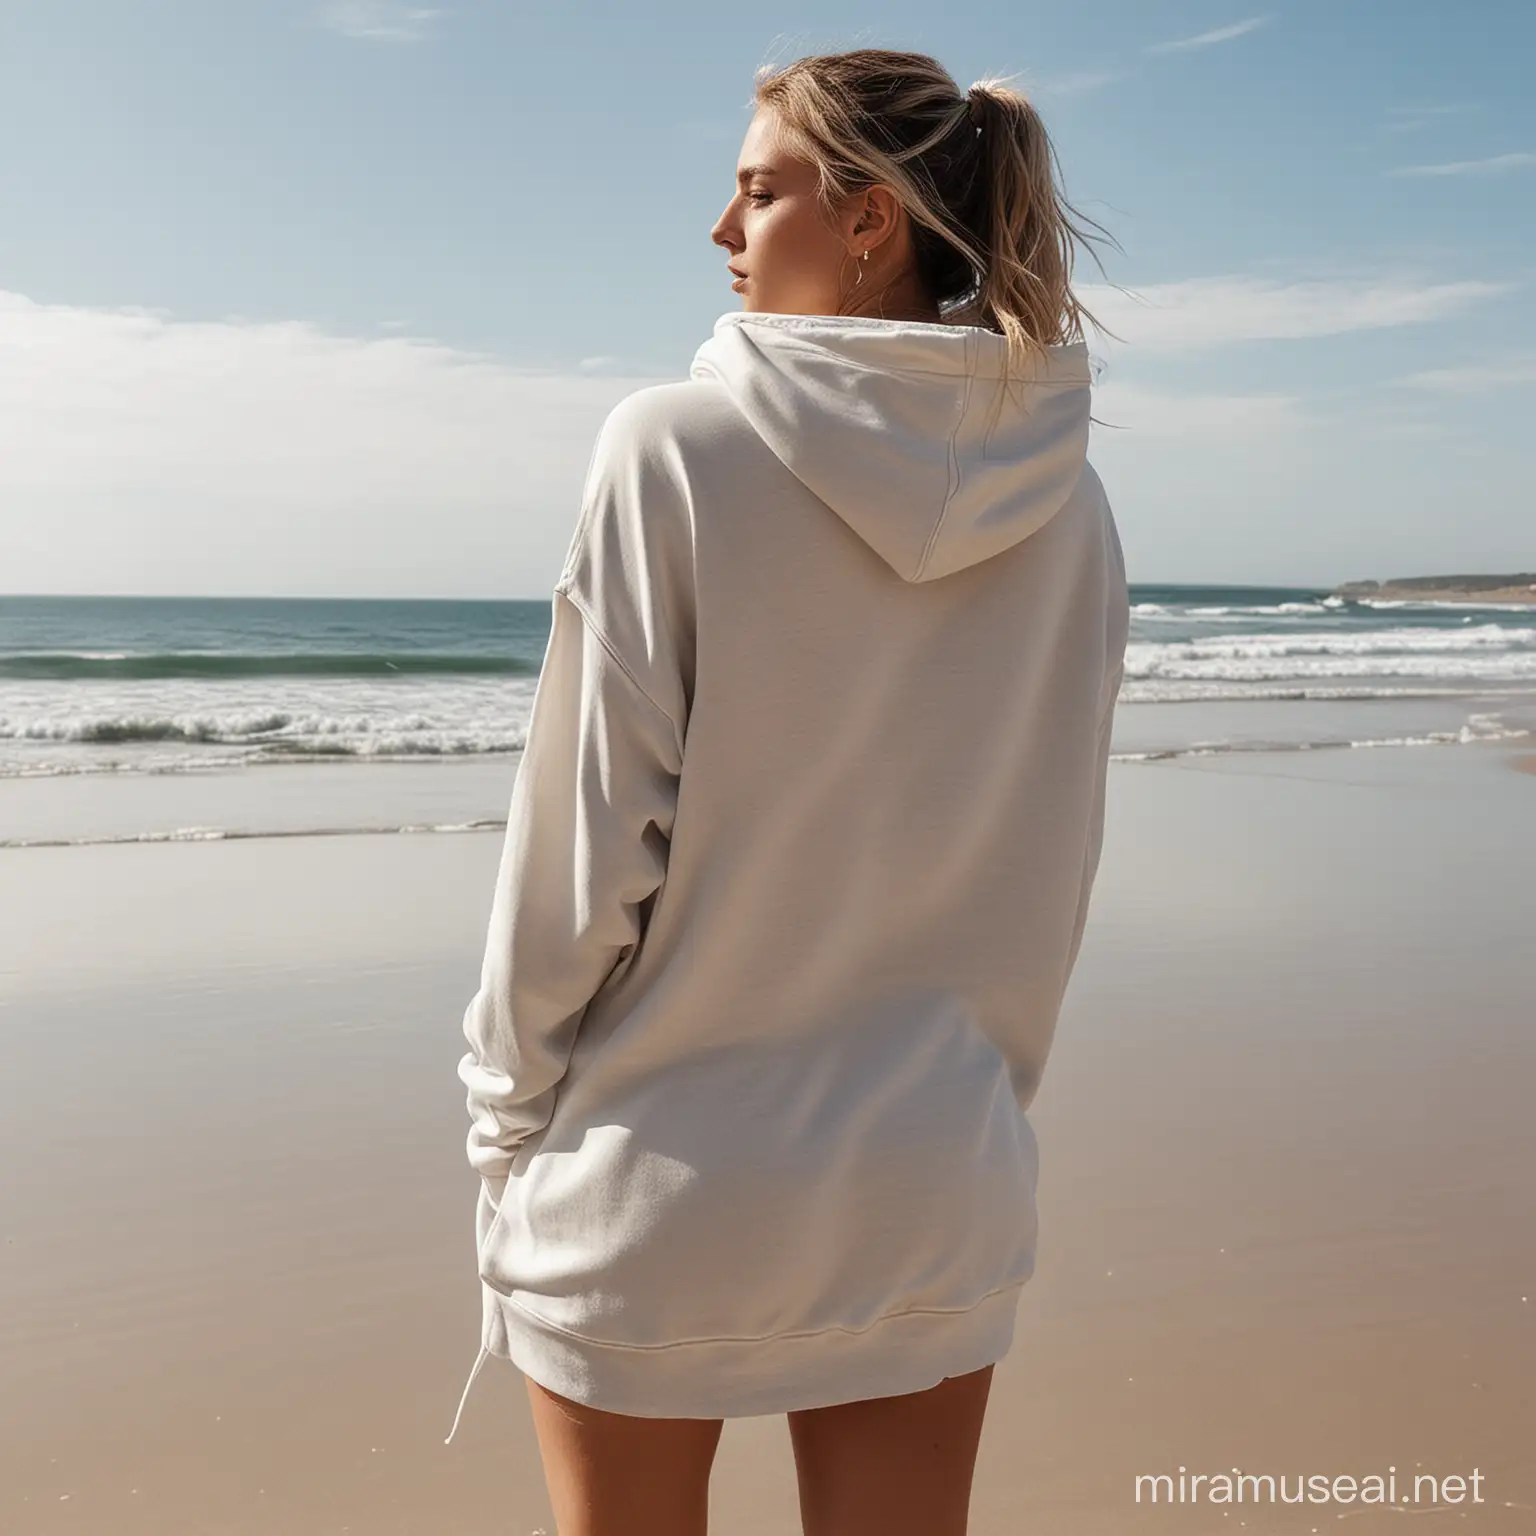 Fashionable Woman in Oversized Hoodie Enjoys Beach View